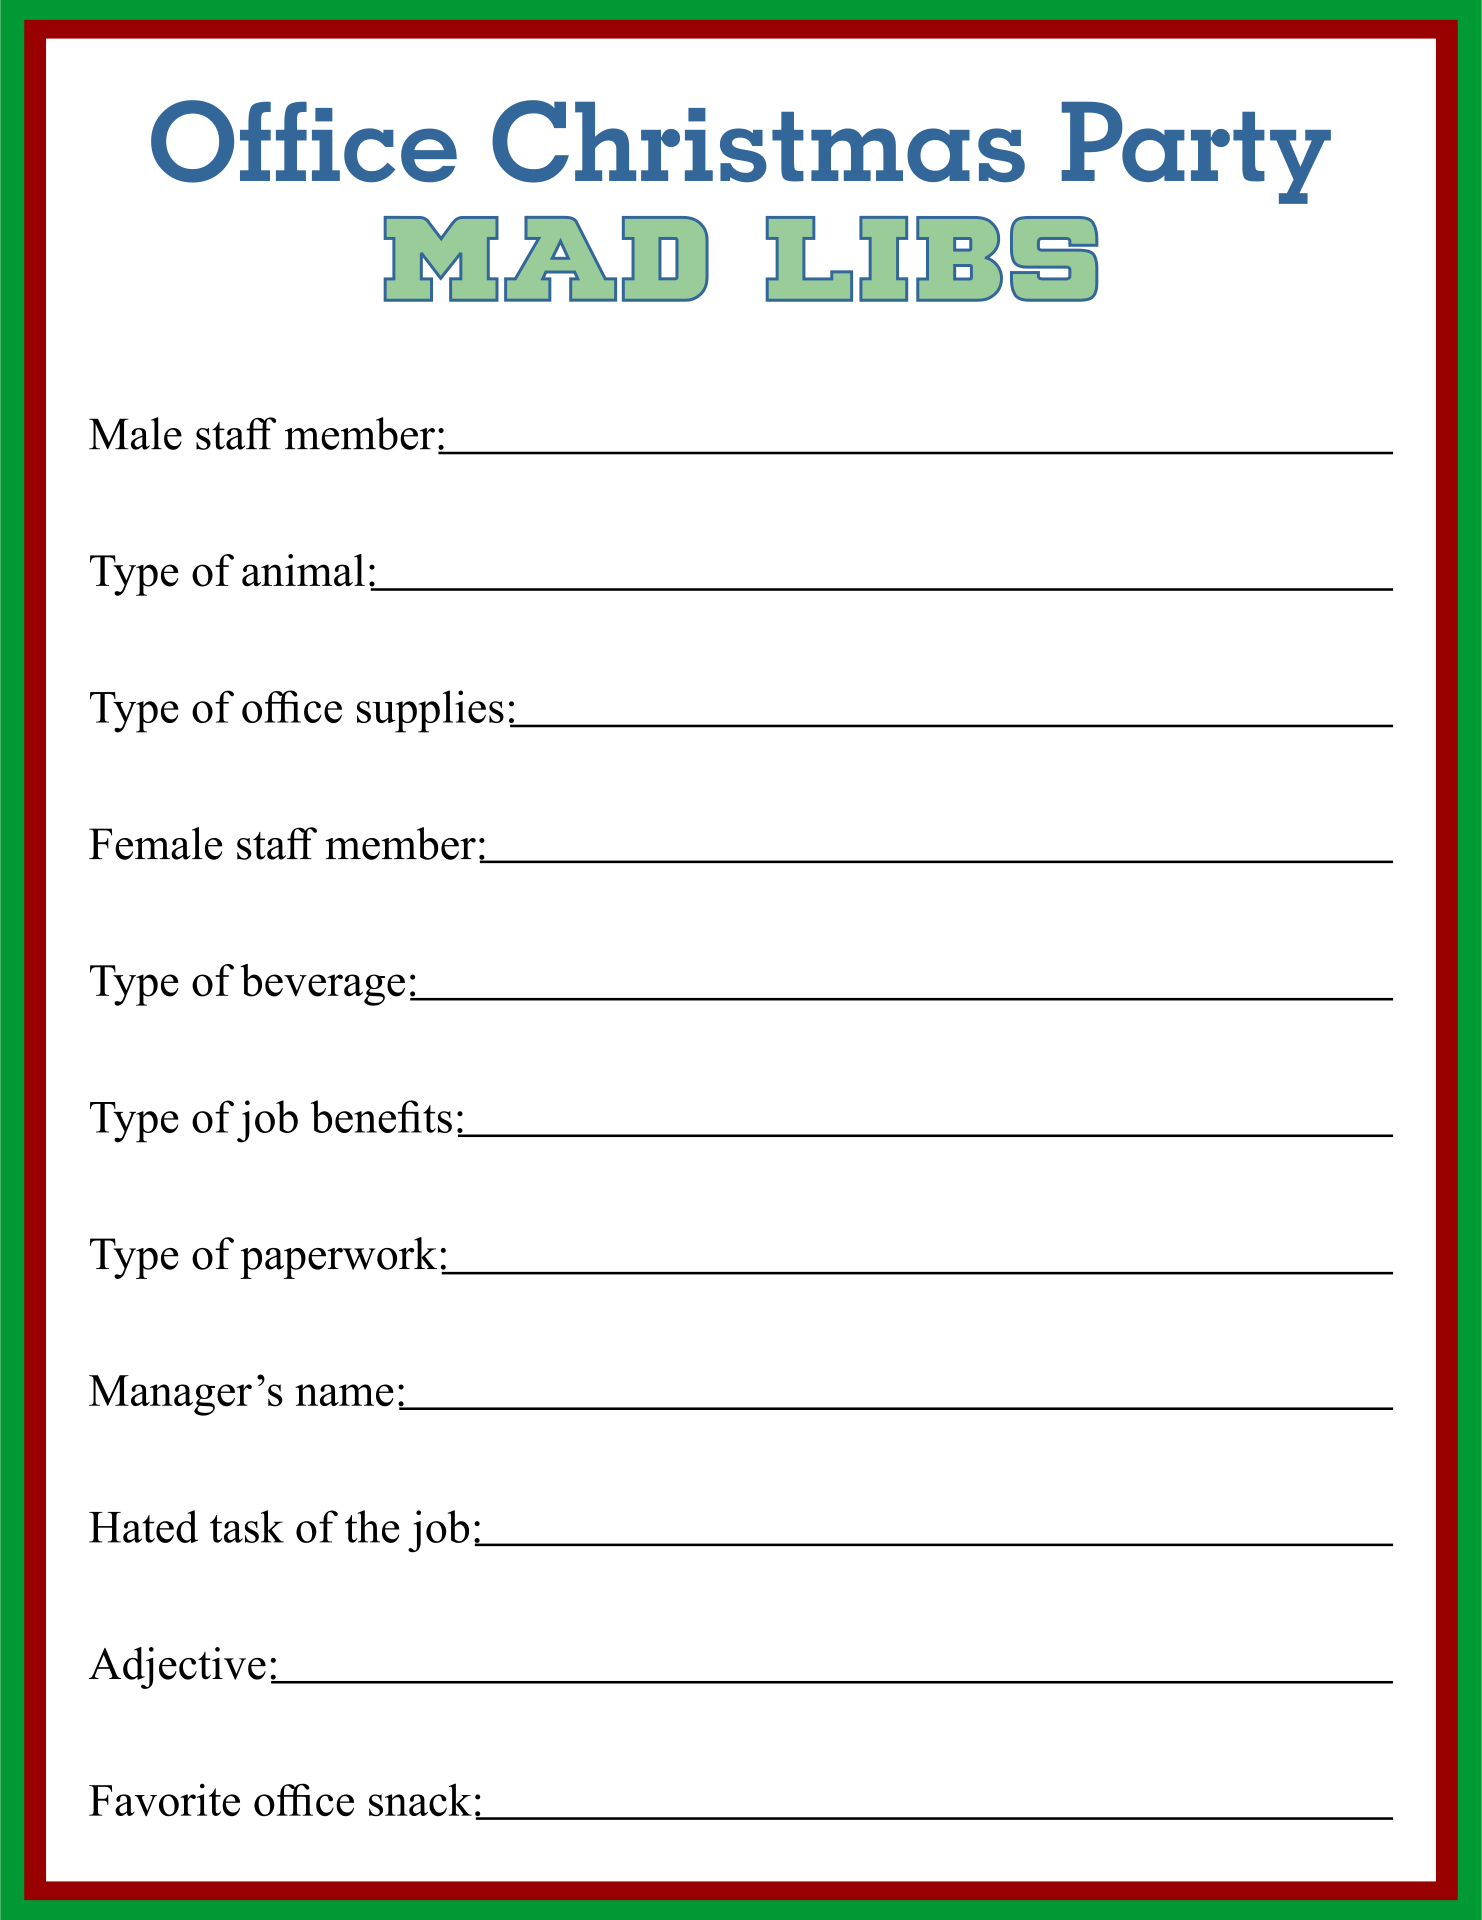 Printable Office Christmas Party Mad Libs